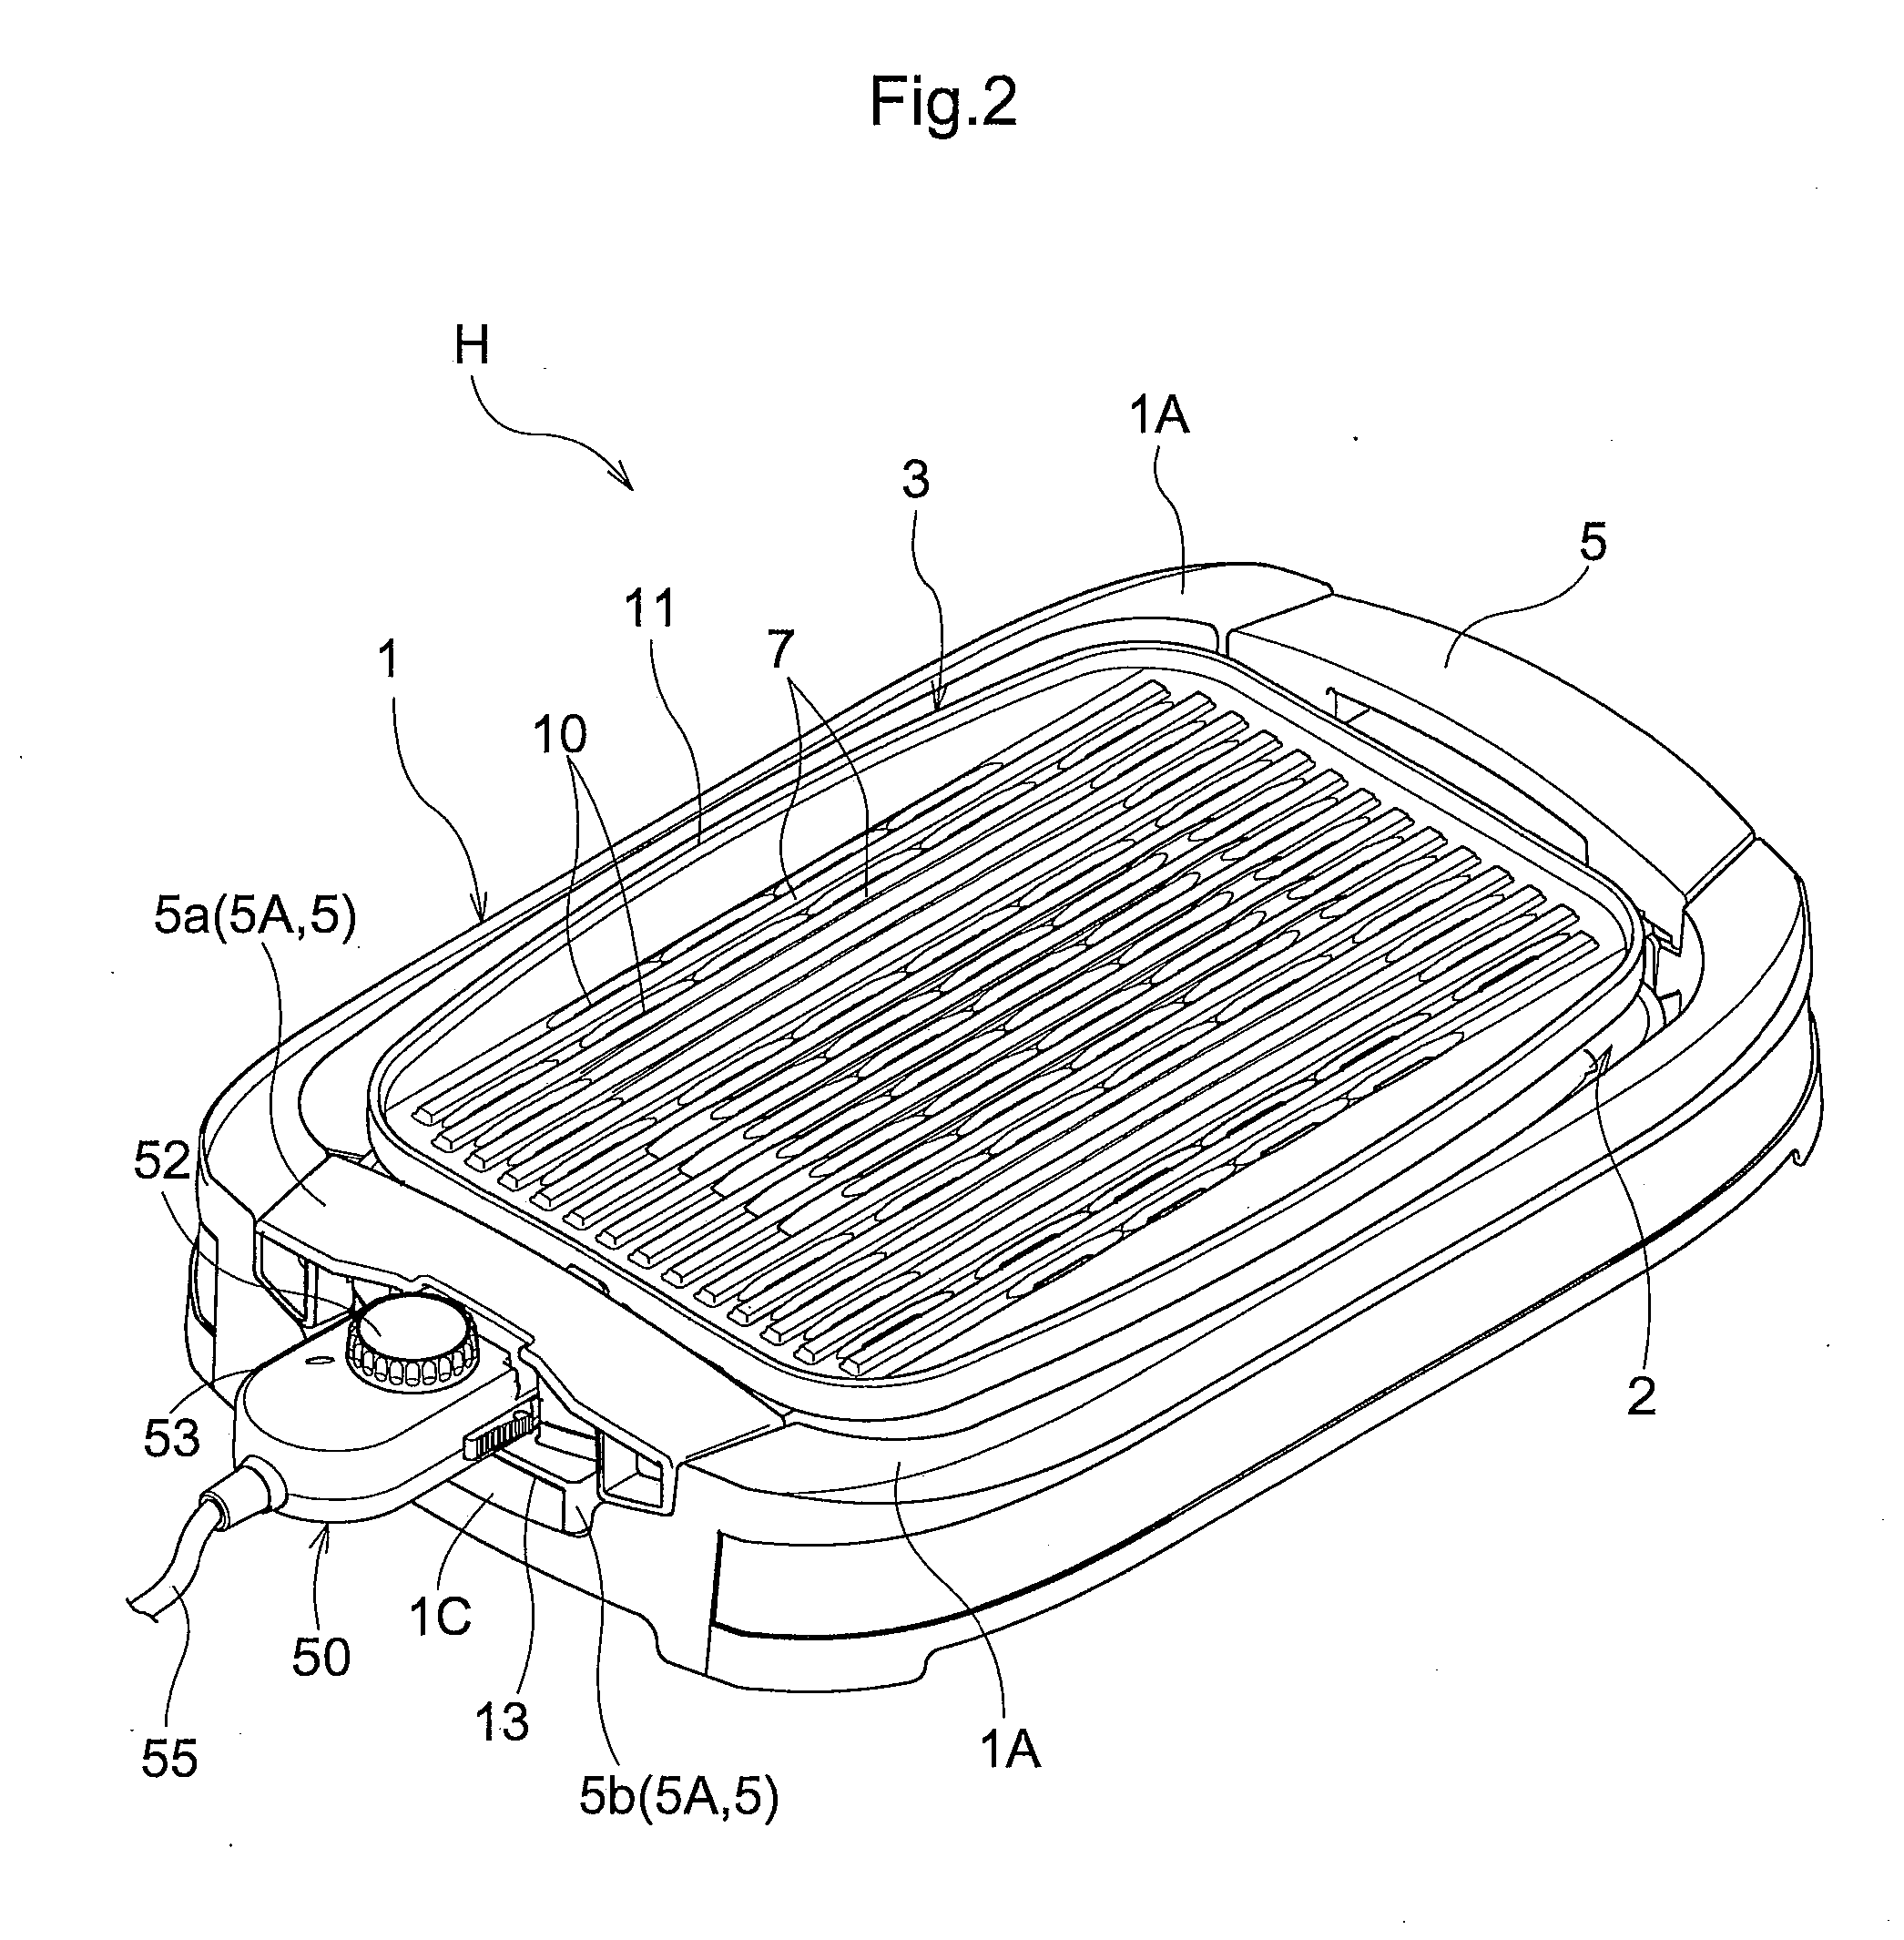 Electrothermal Heating Device